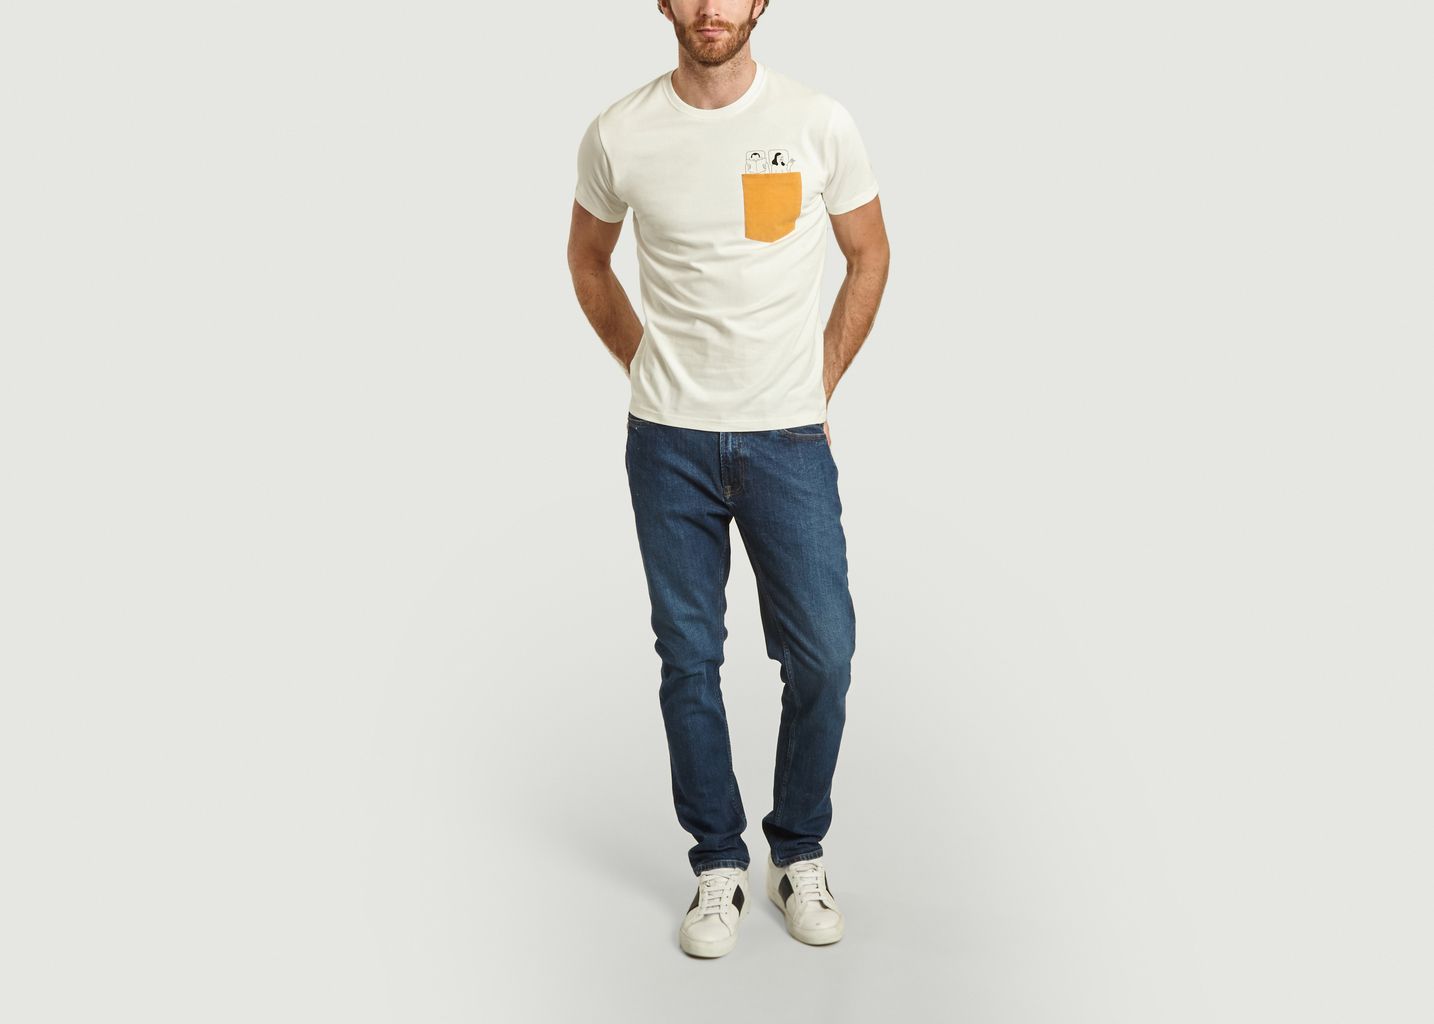 Beddy t-shirt - Olow